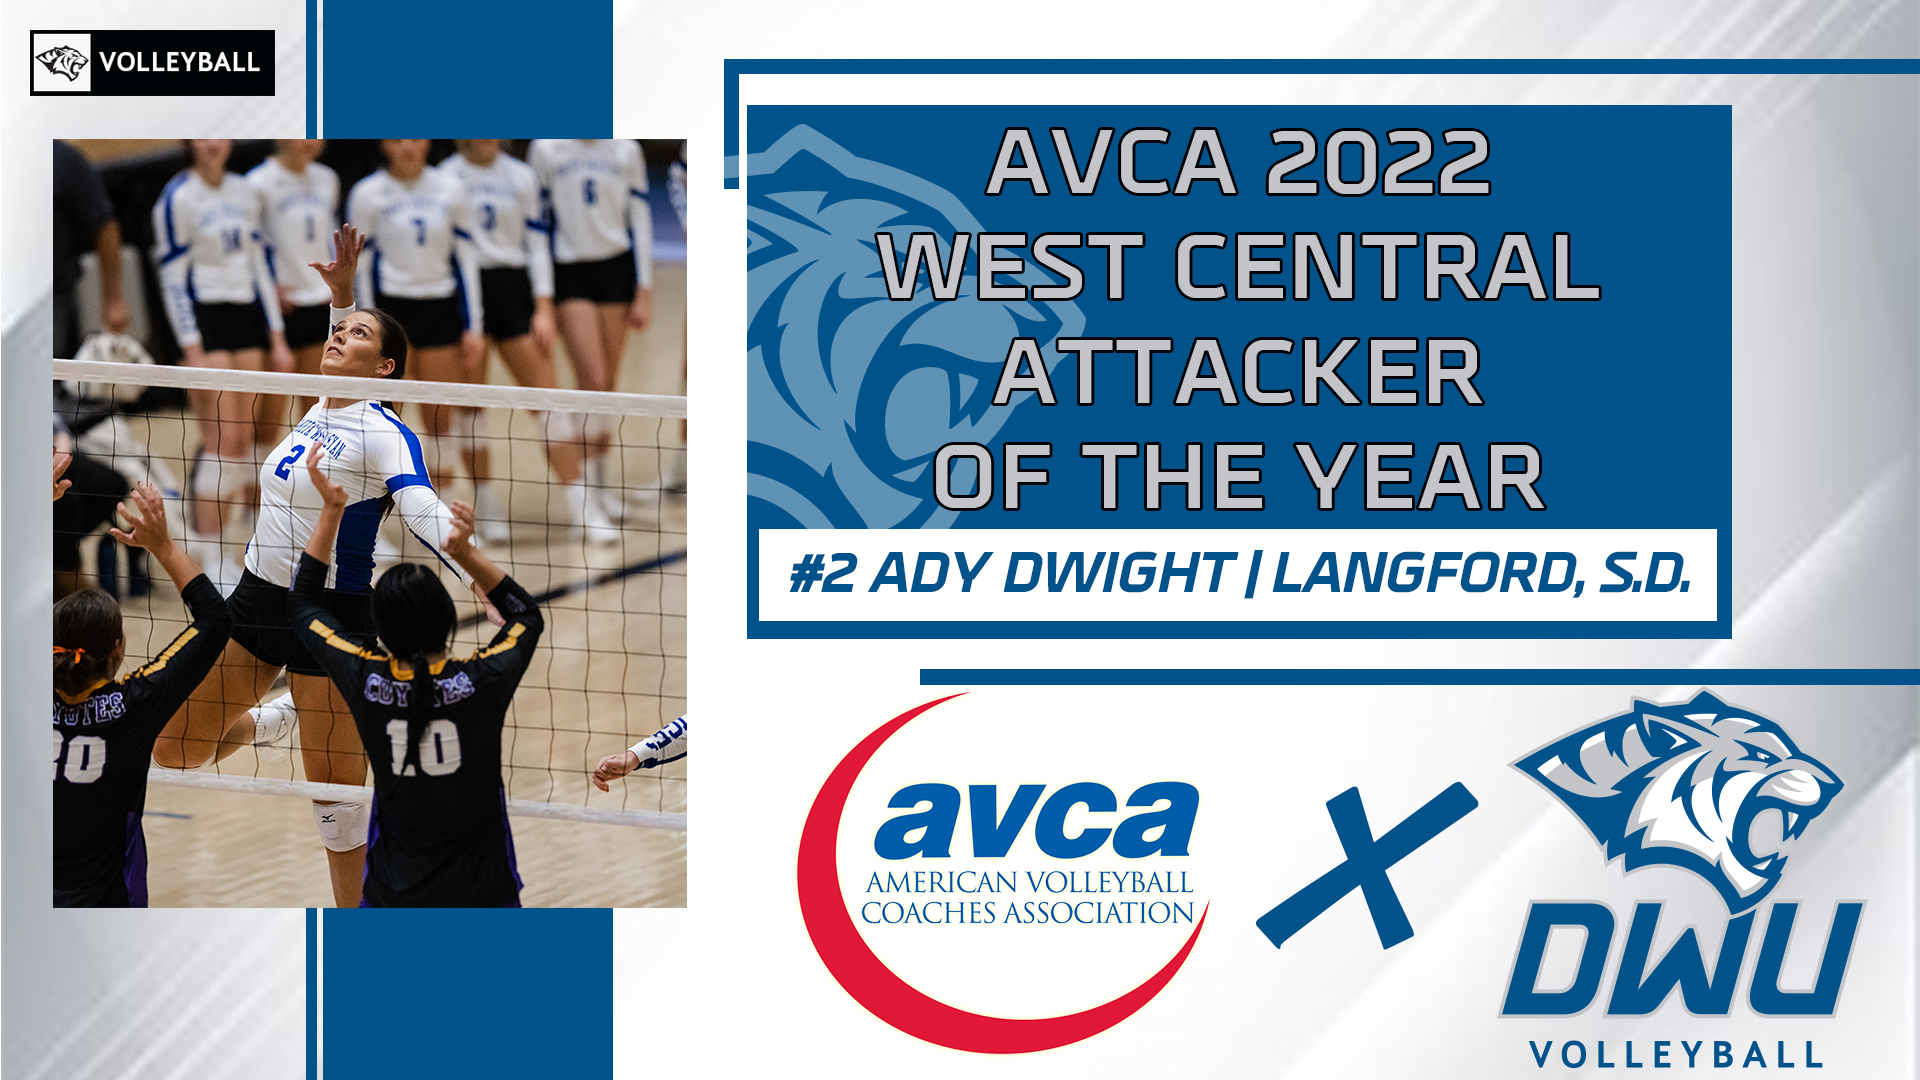 DWIGHT TABBED AS AVCA WEST CENTRAL ATTACKER OF THE YEAR; WHILE DWIGHT AND ELSE HONORED AS ALL-REGION PLAYERS